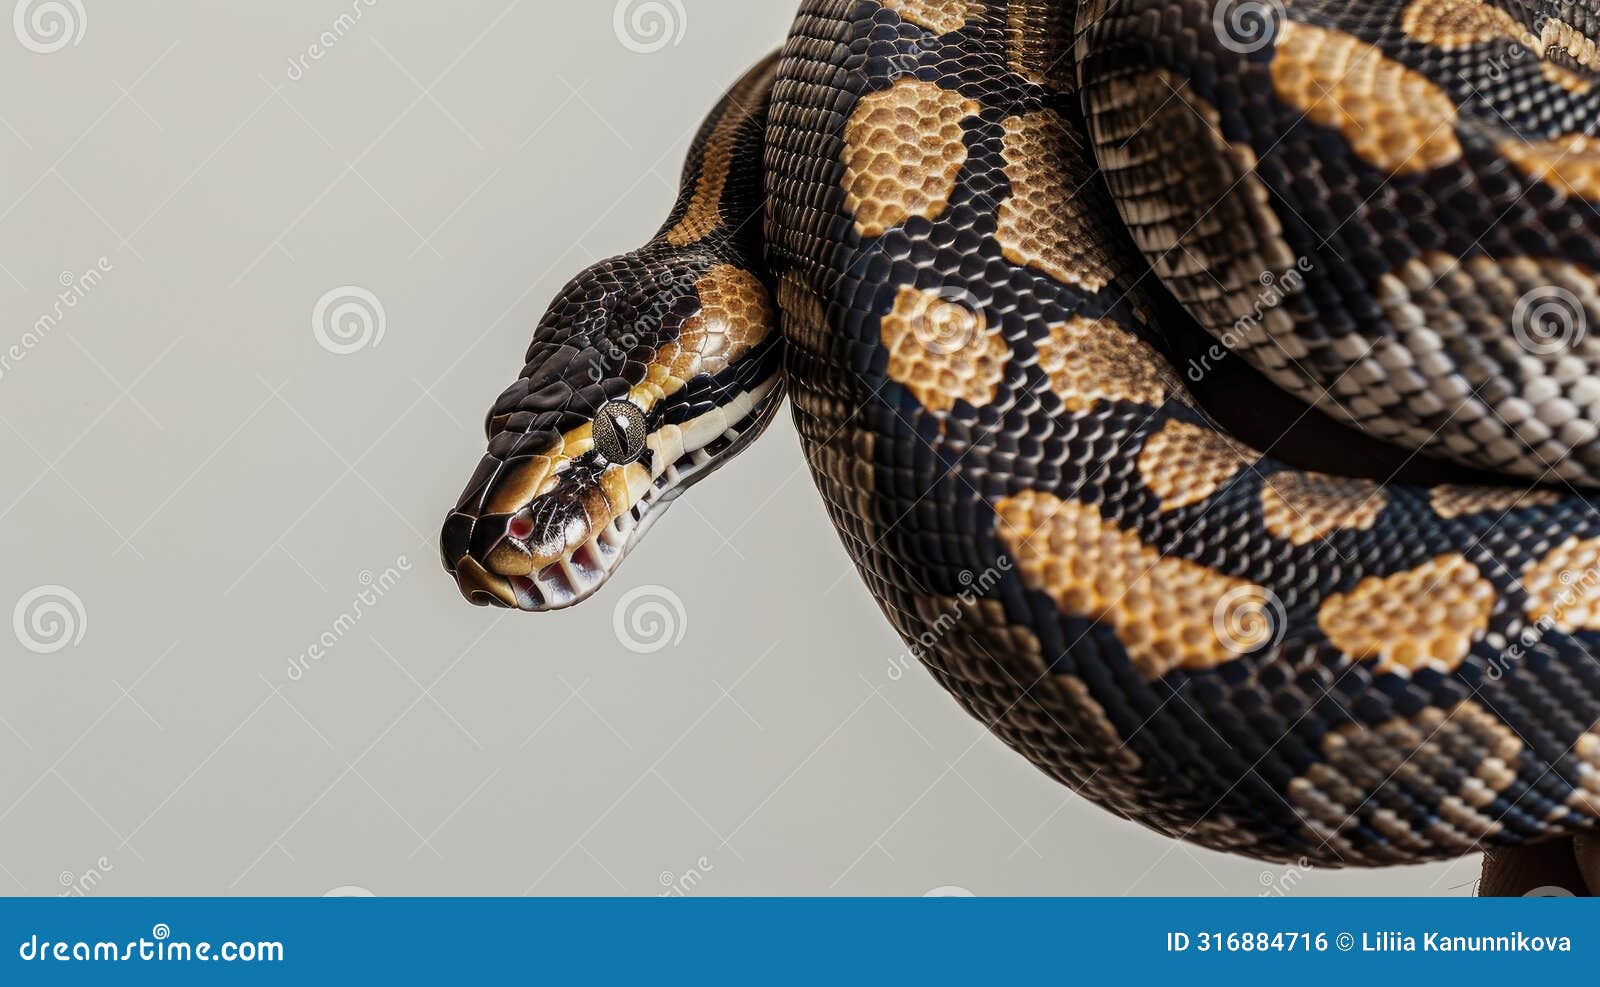 a ball python against a pristine white background, showcasing its striking patterns and unique coloration in a